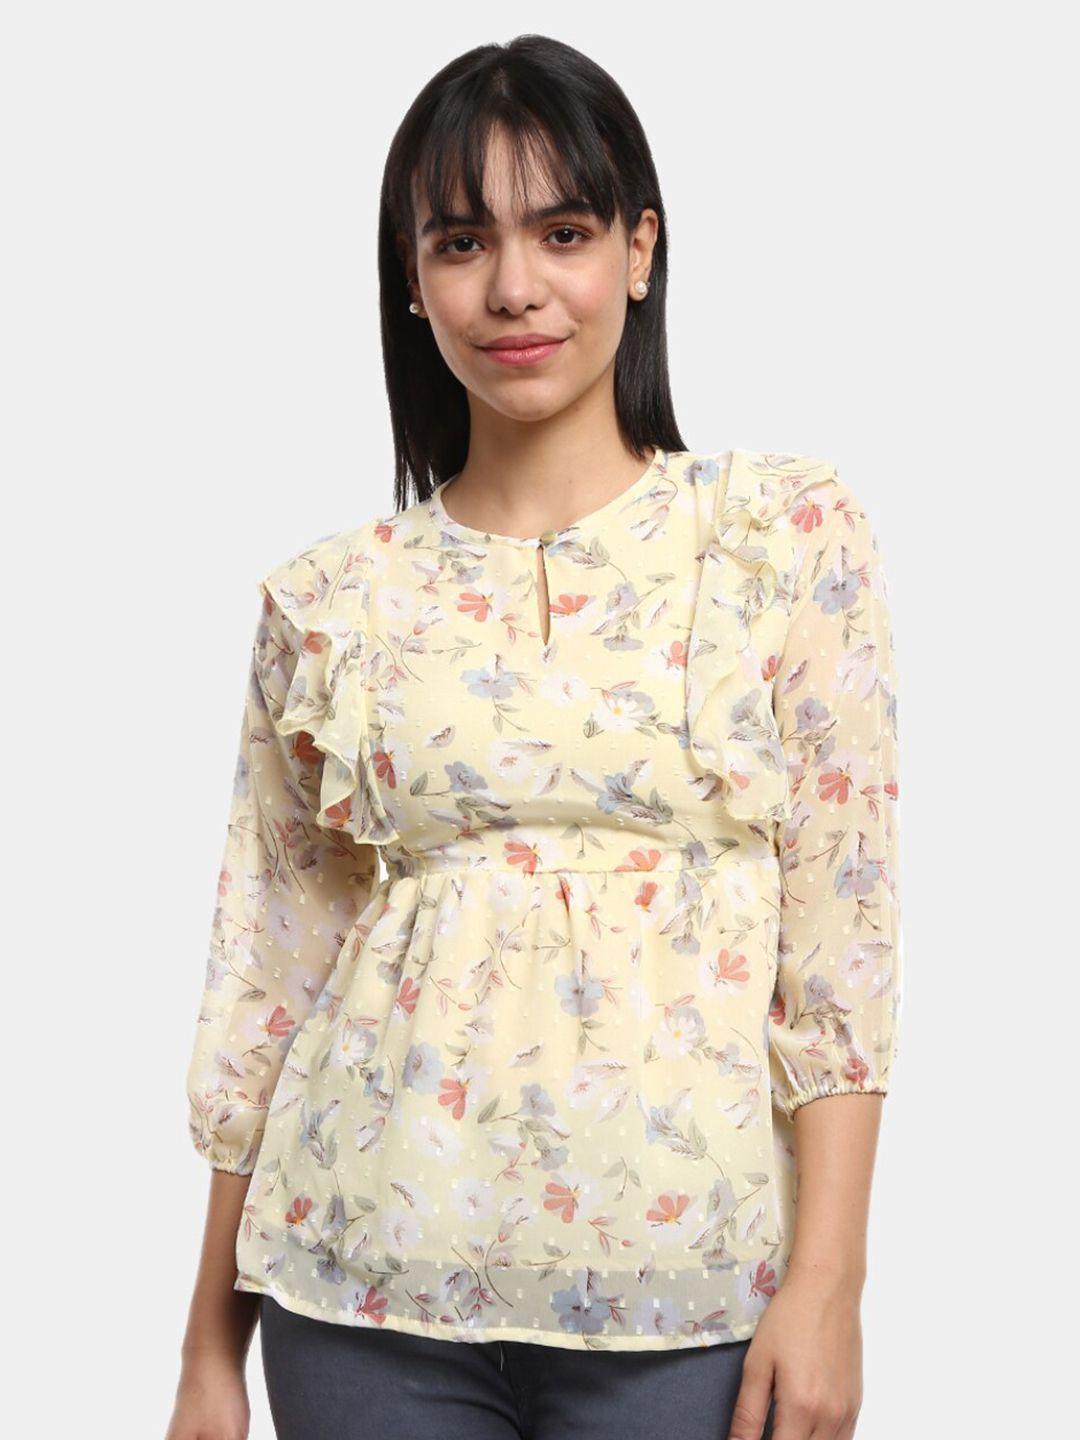 v-mart yellow floral print keyhole neck georgette empire top